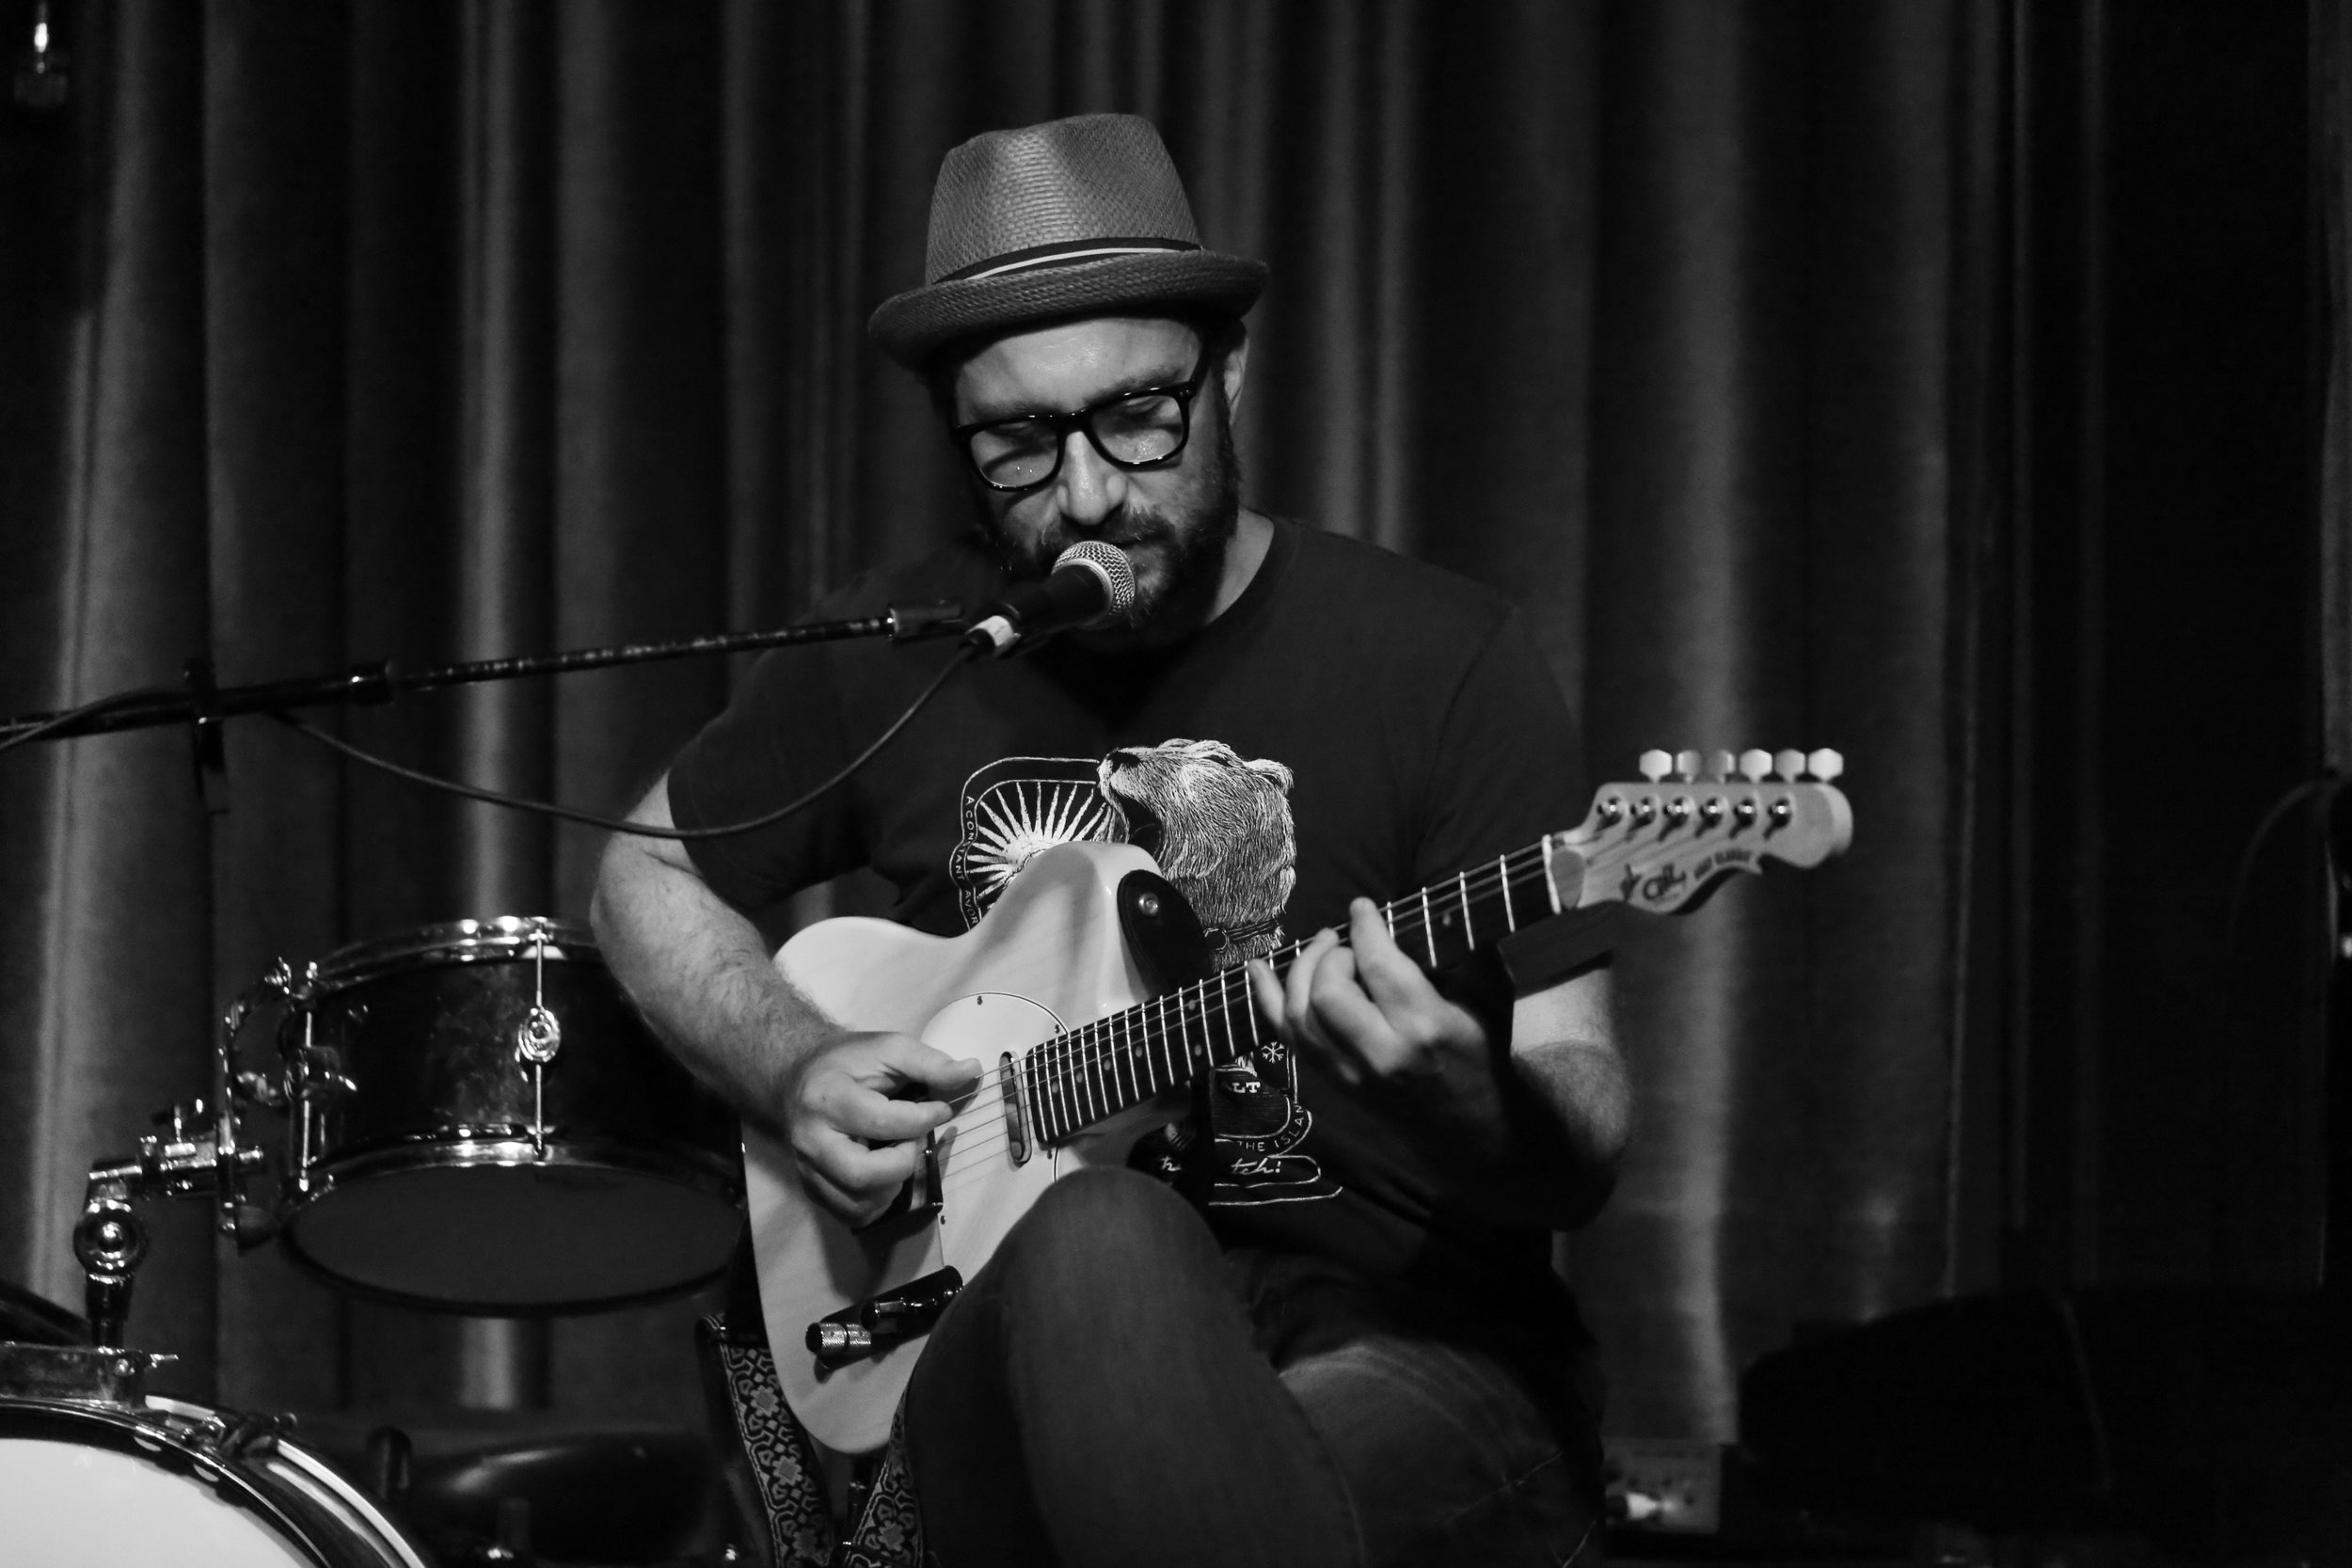 Mike Vitale live at Hotel Cafe on July 2nd 2018